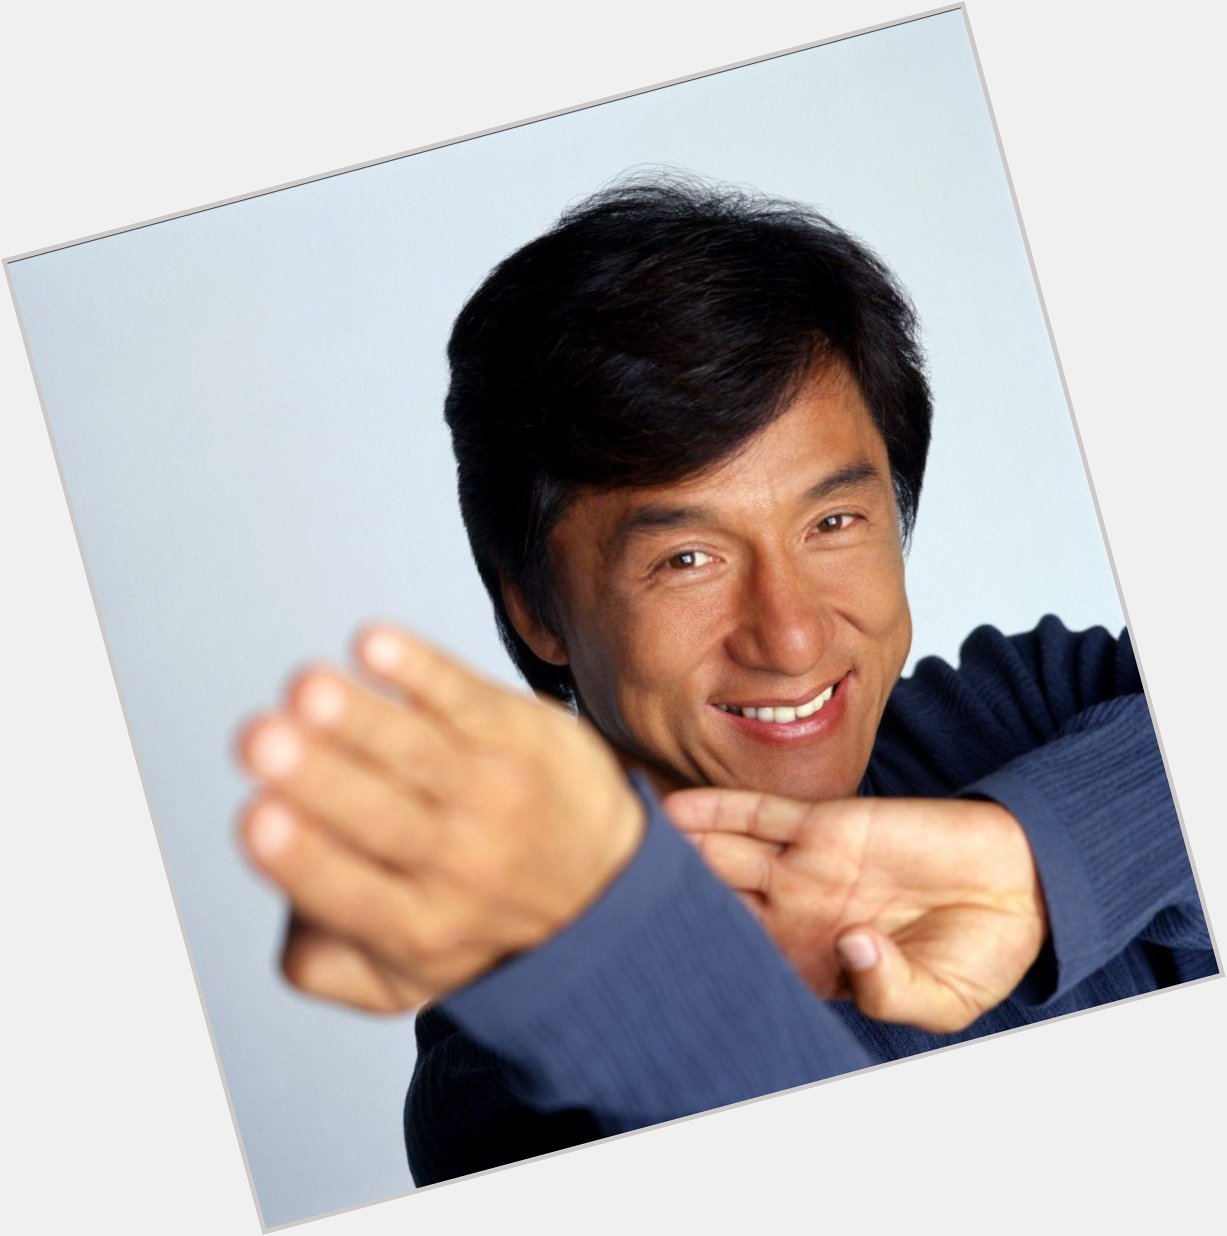 Donald trump\s bullshit almost made me forget that today is jackie chan\s birthday HAPPY BIRTHDAY JACKIE 